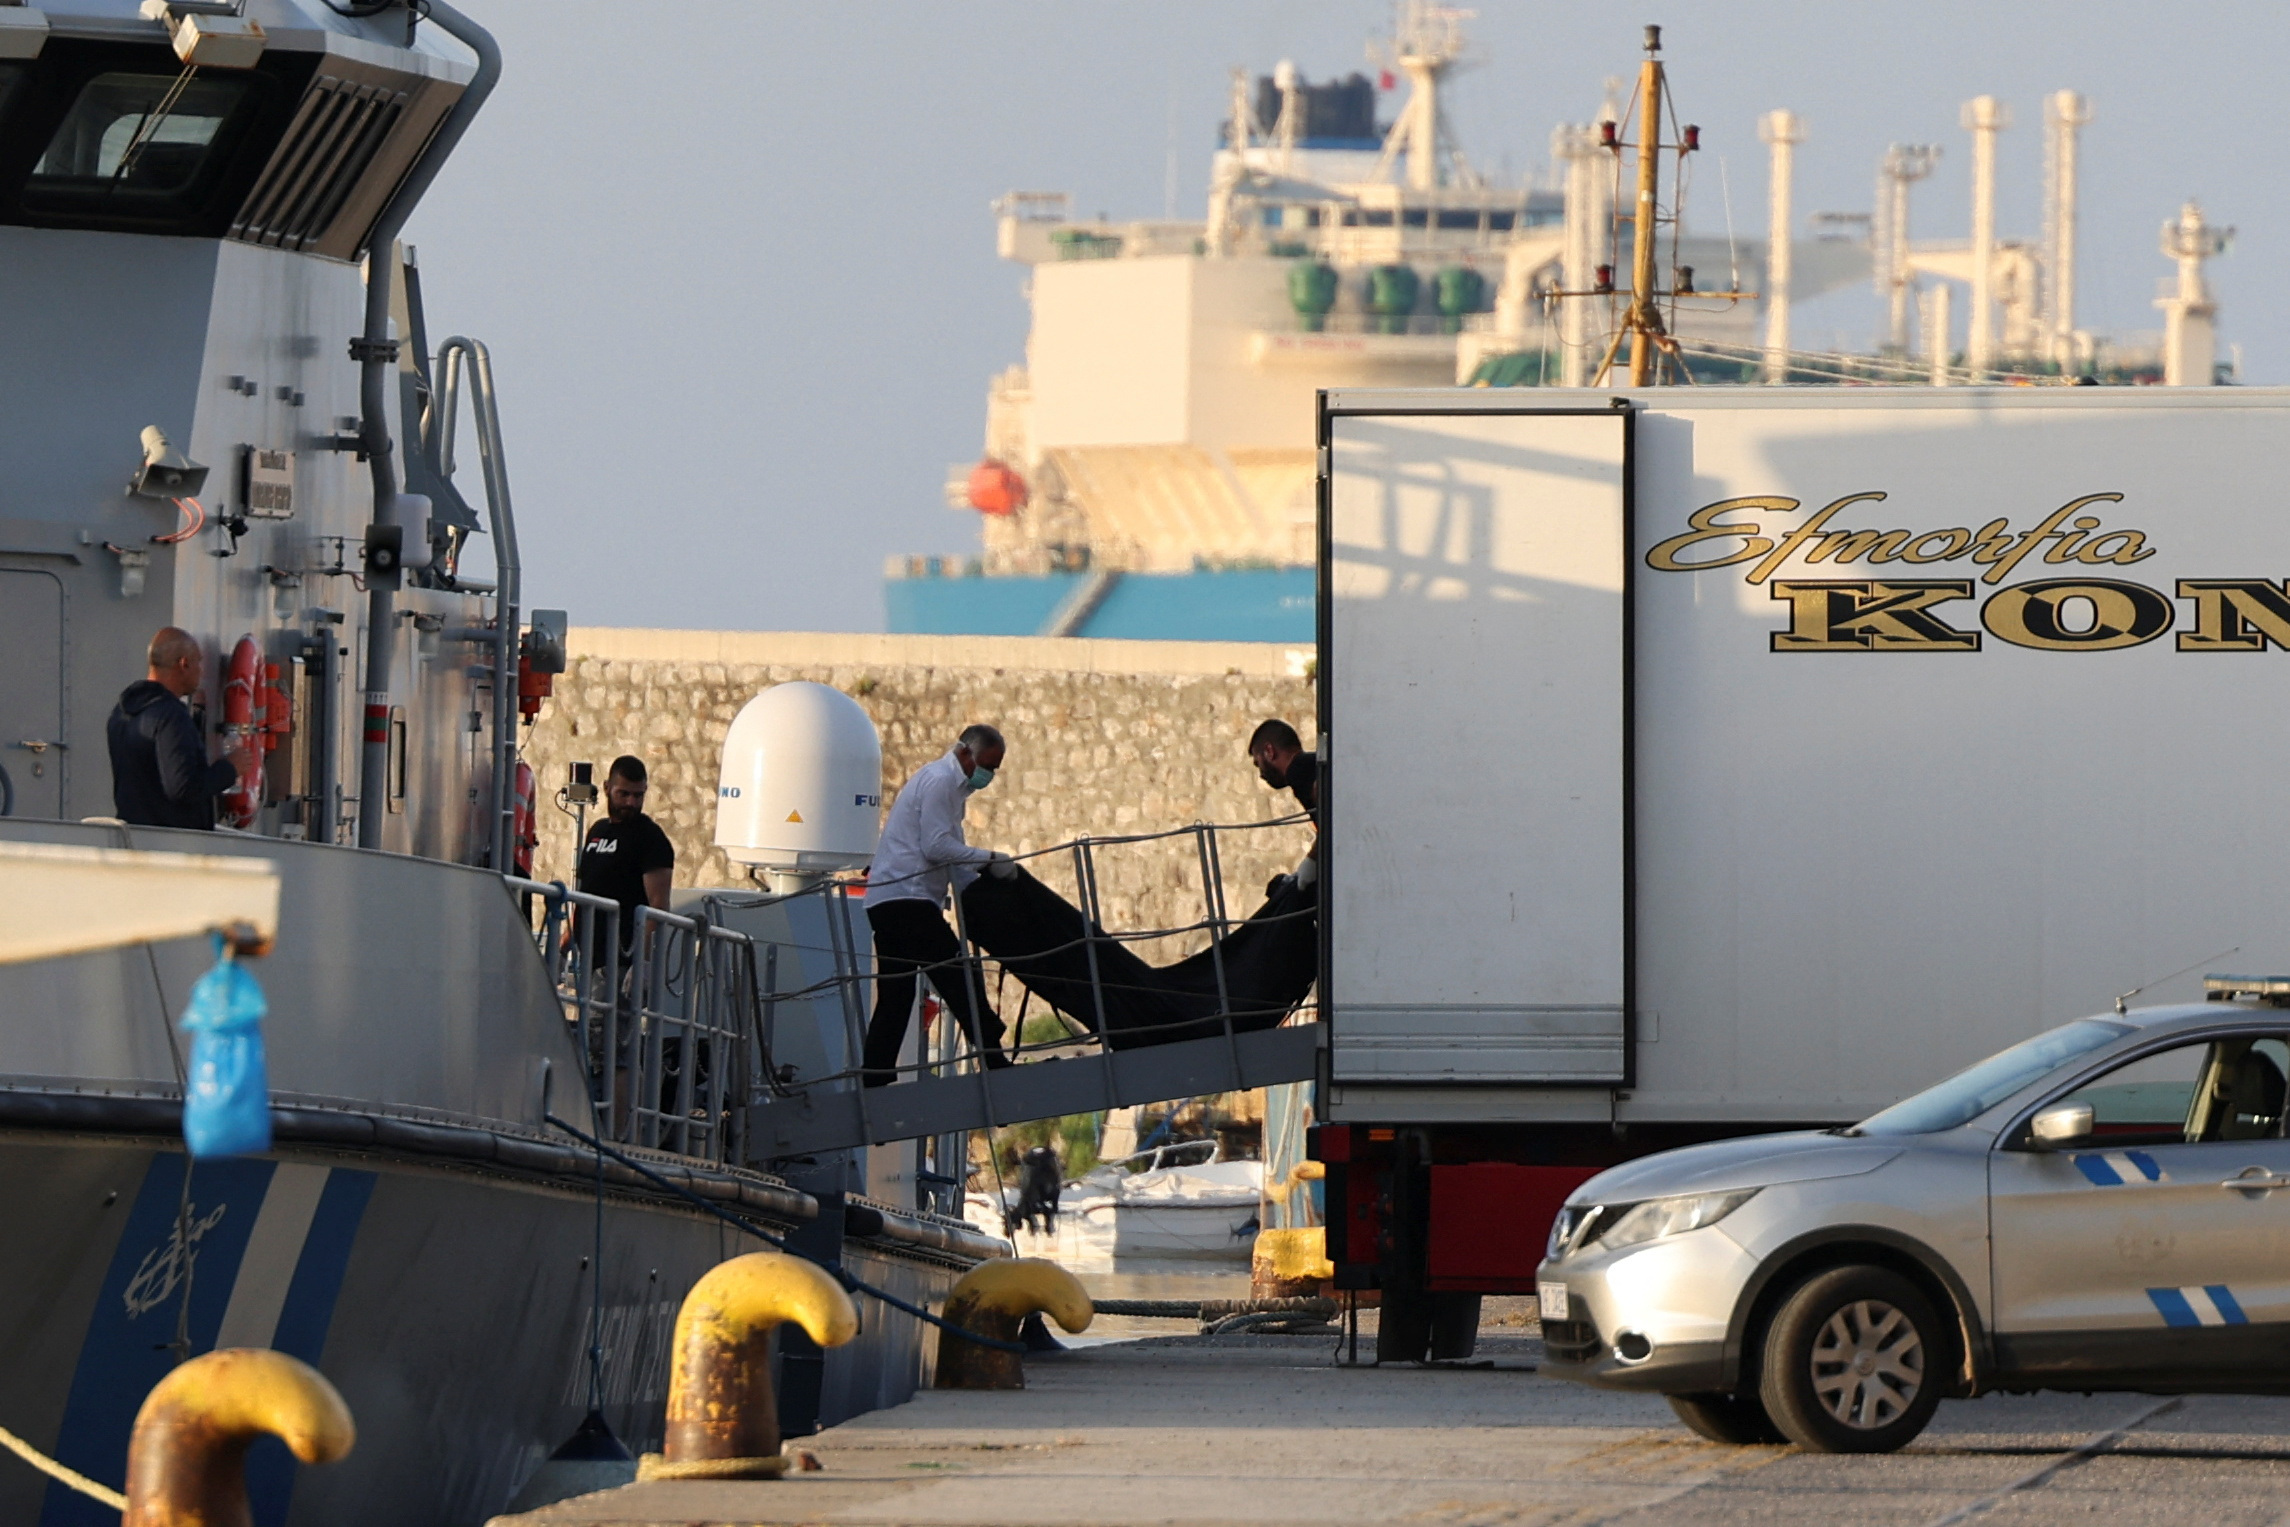 Body bags carrying migrants who drowned at sea in a shipwreck arrive in Greek port